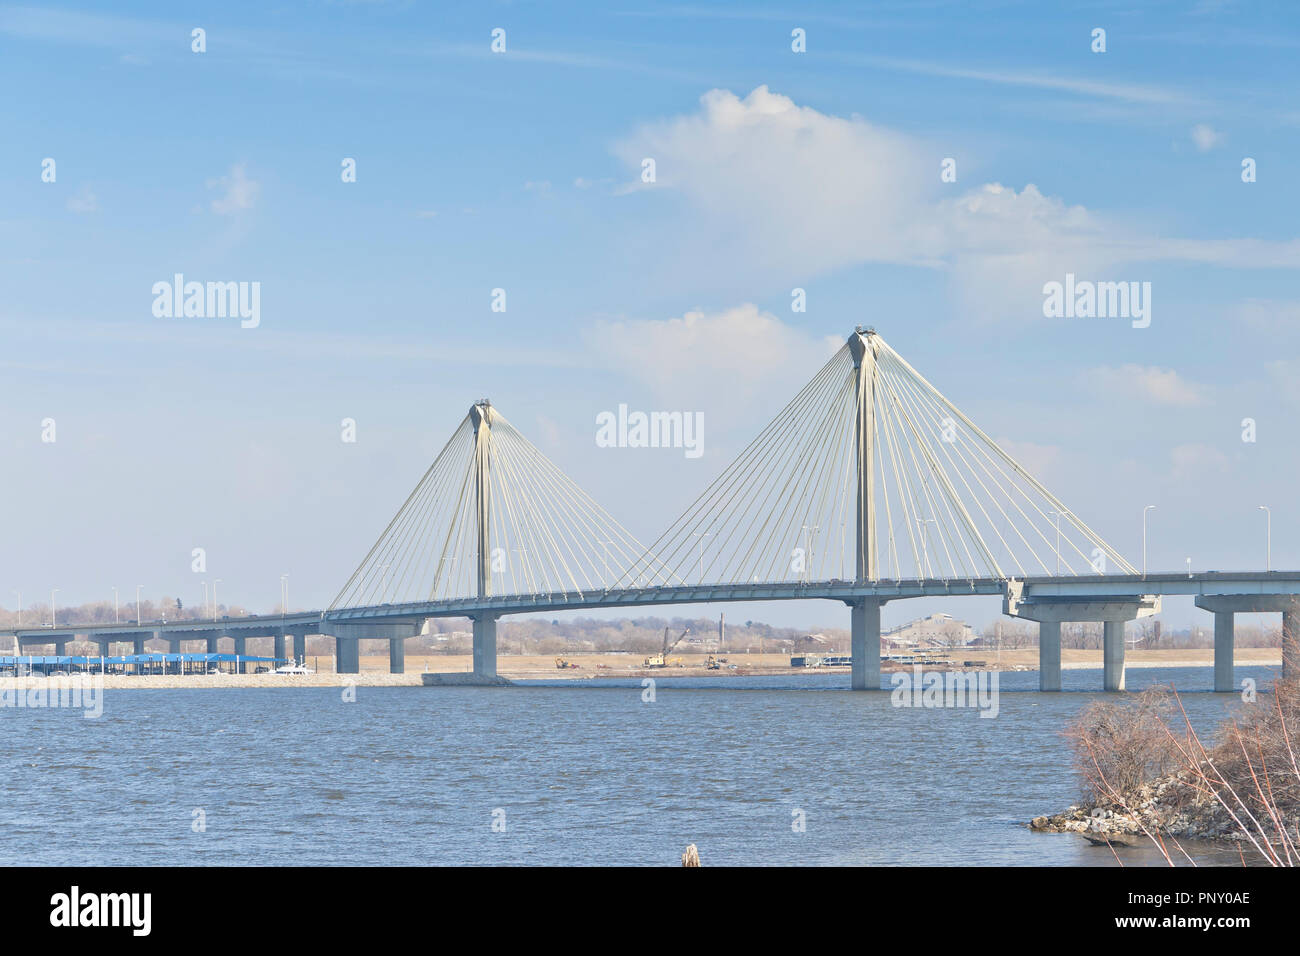 The Clark Bridge under droopy clouds and a pale blue sky seen from the Lincoln-Shields Recreation Area on the Missouri side of the Mississippi River. Stock Photo